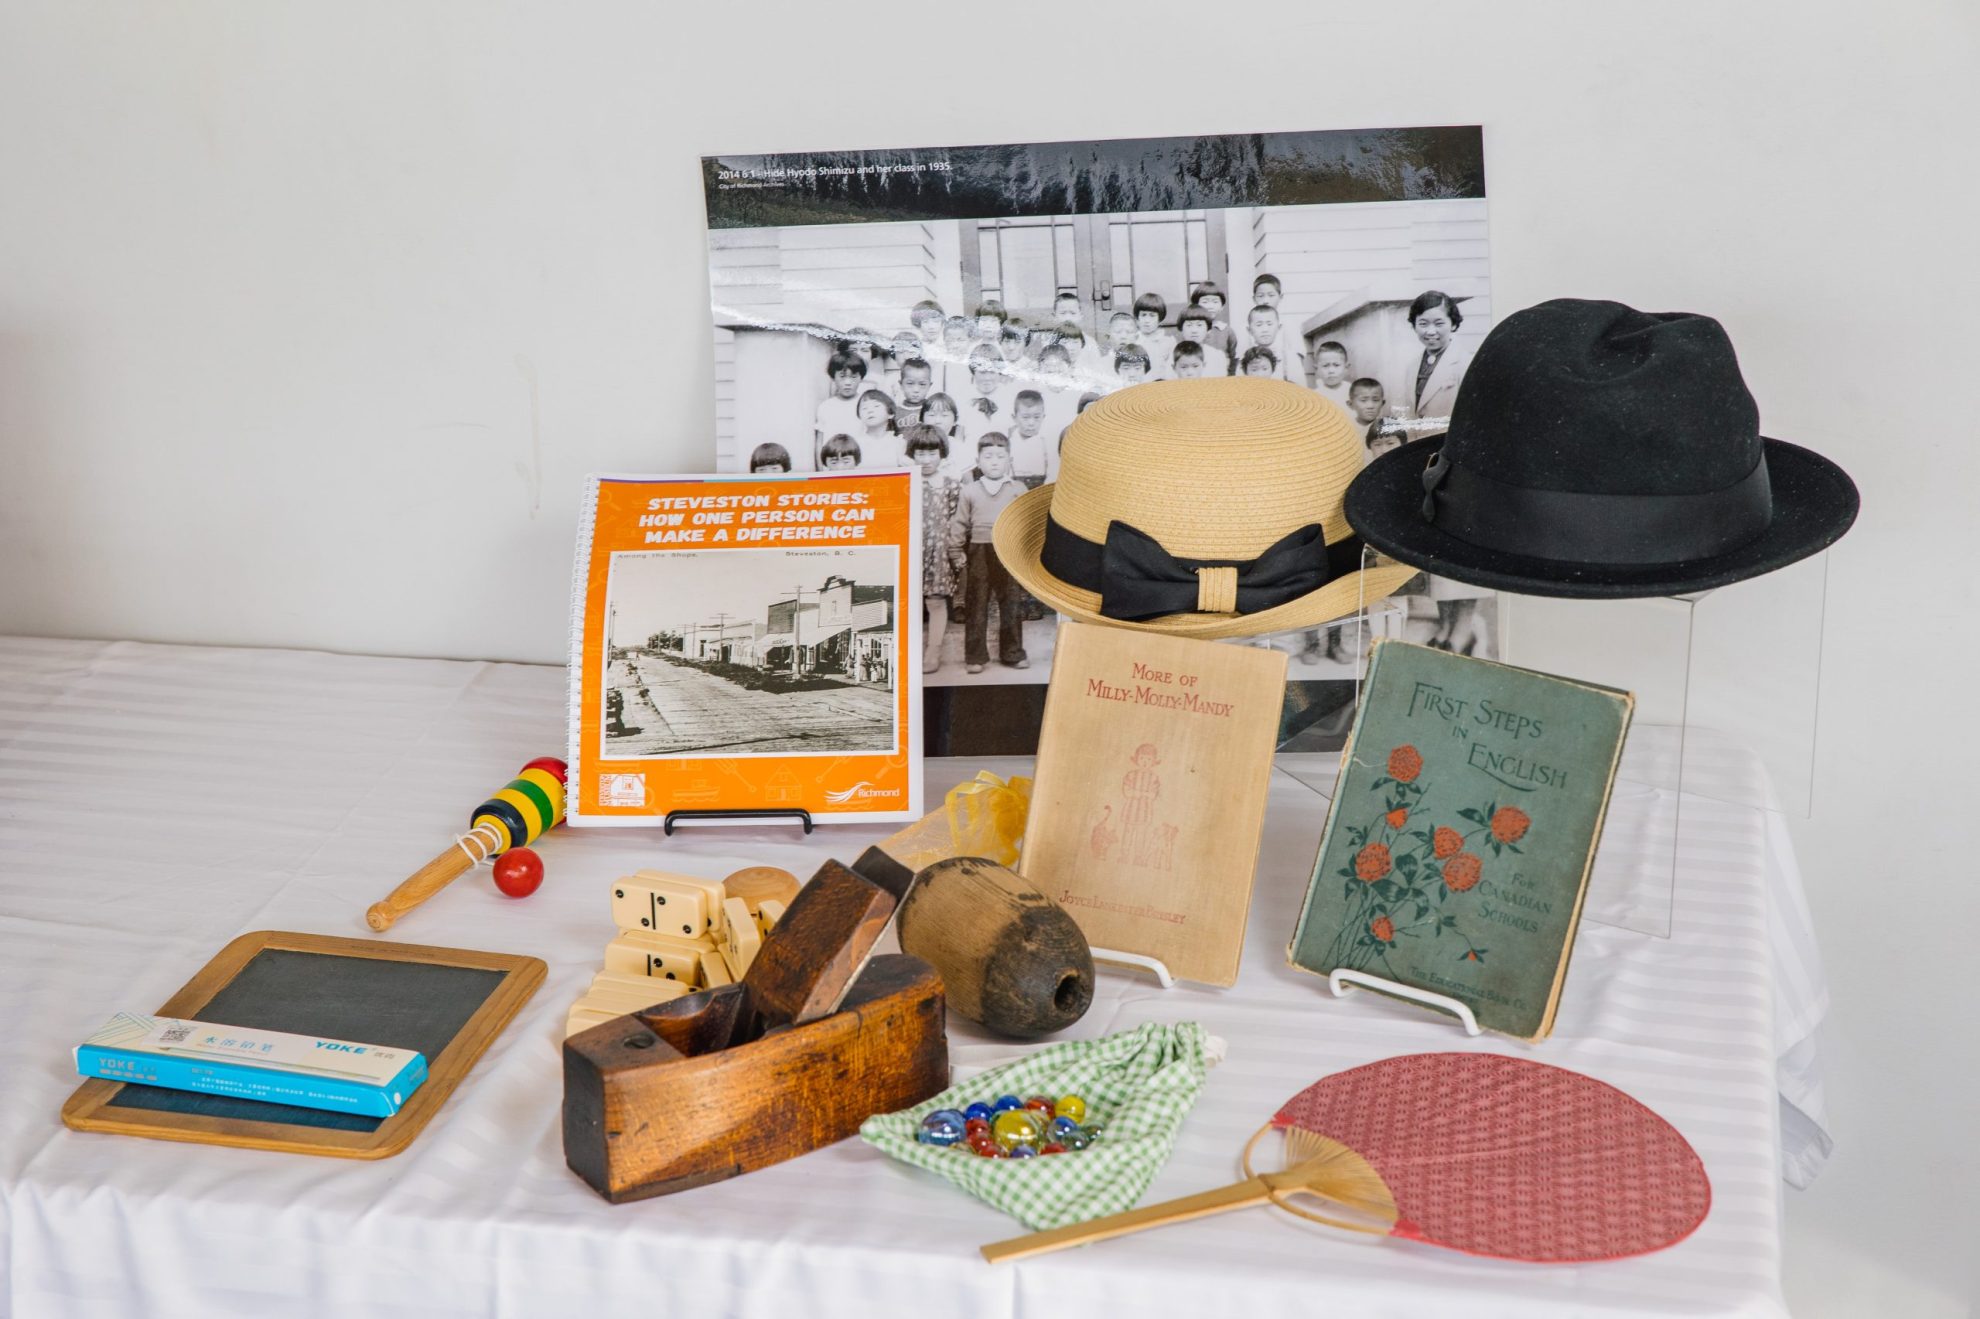 Artefacts and books from the Steveston Stories education kit on display on a white table